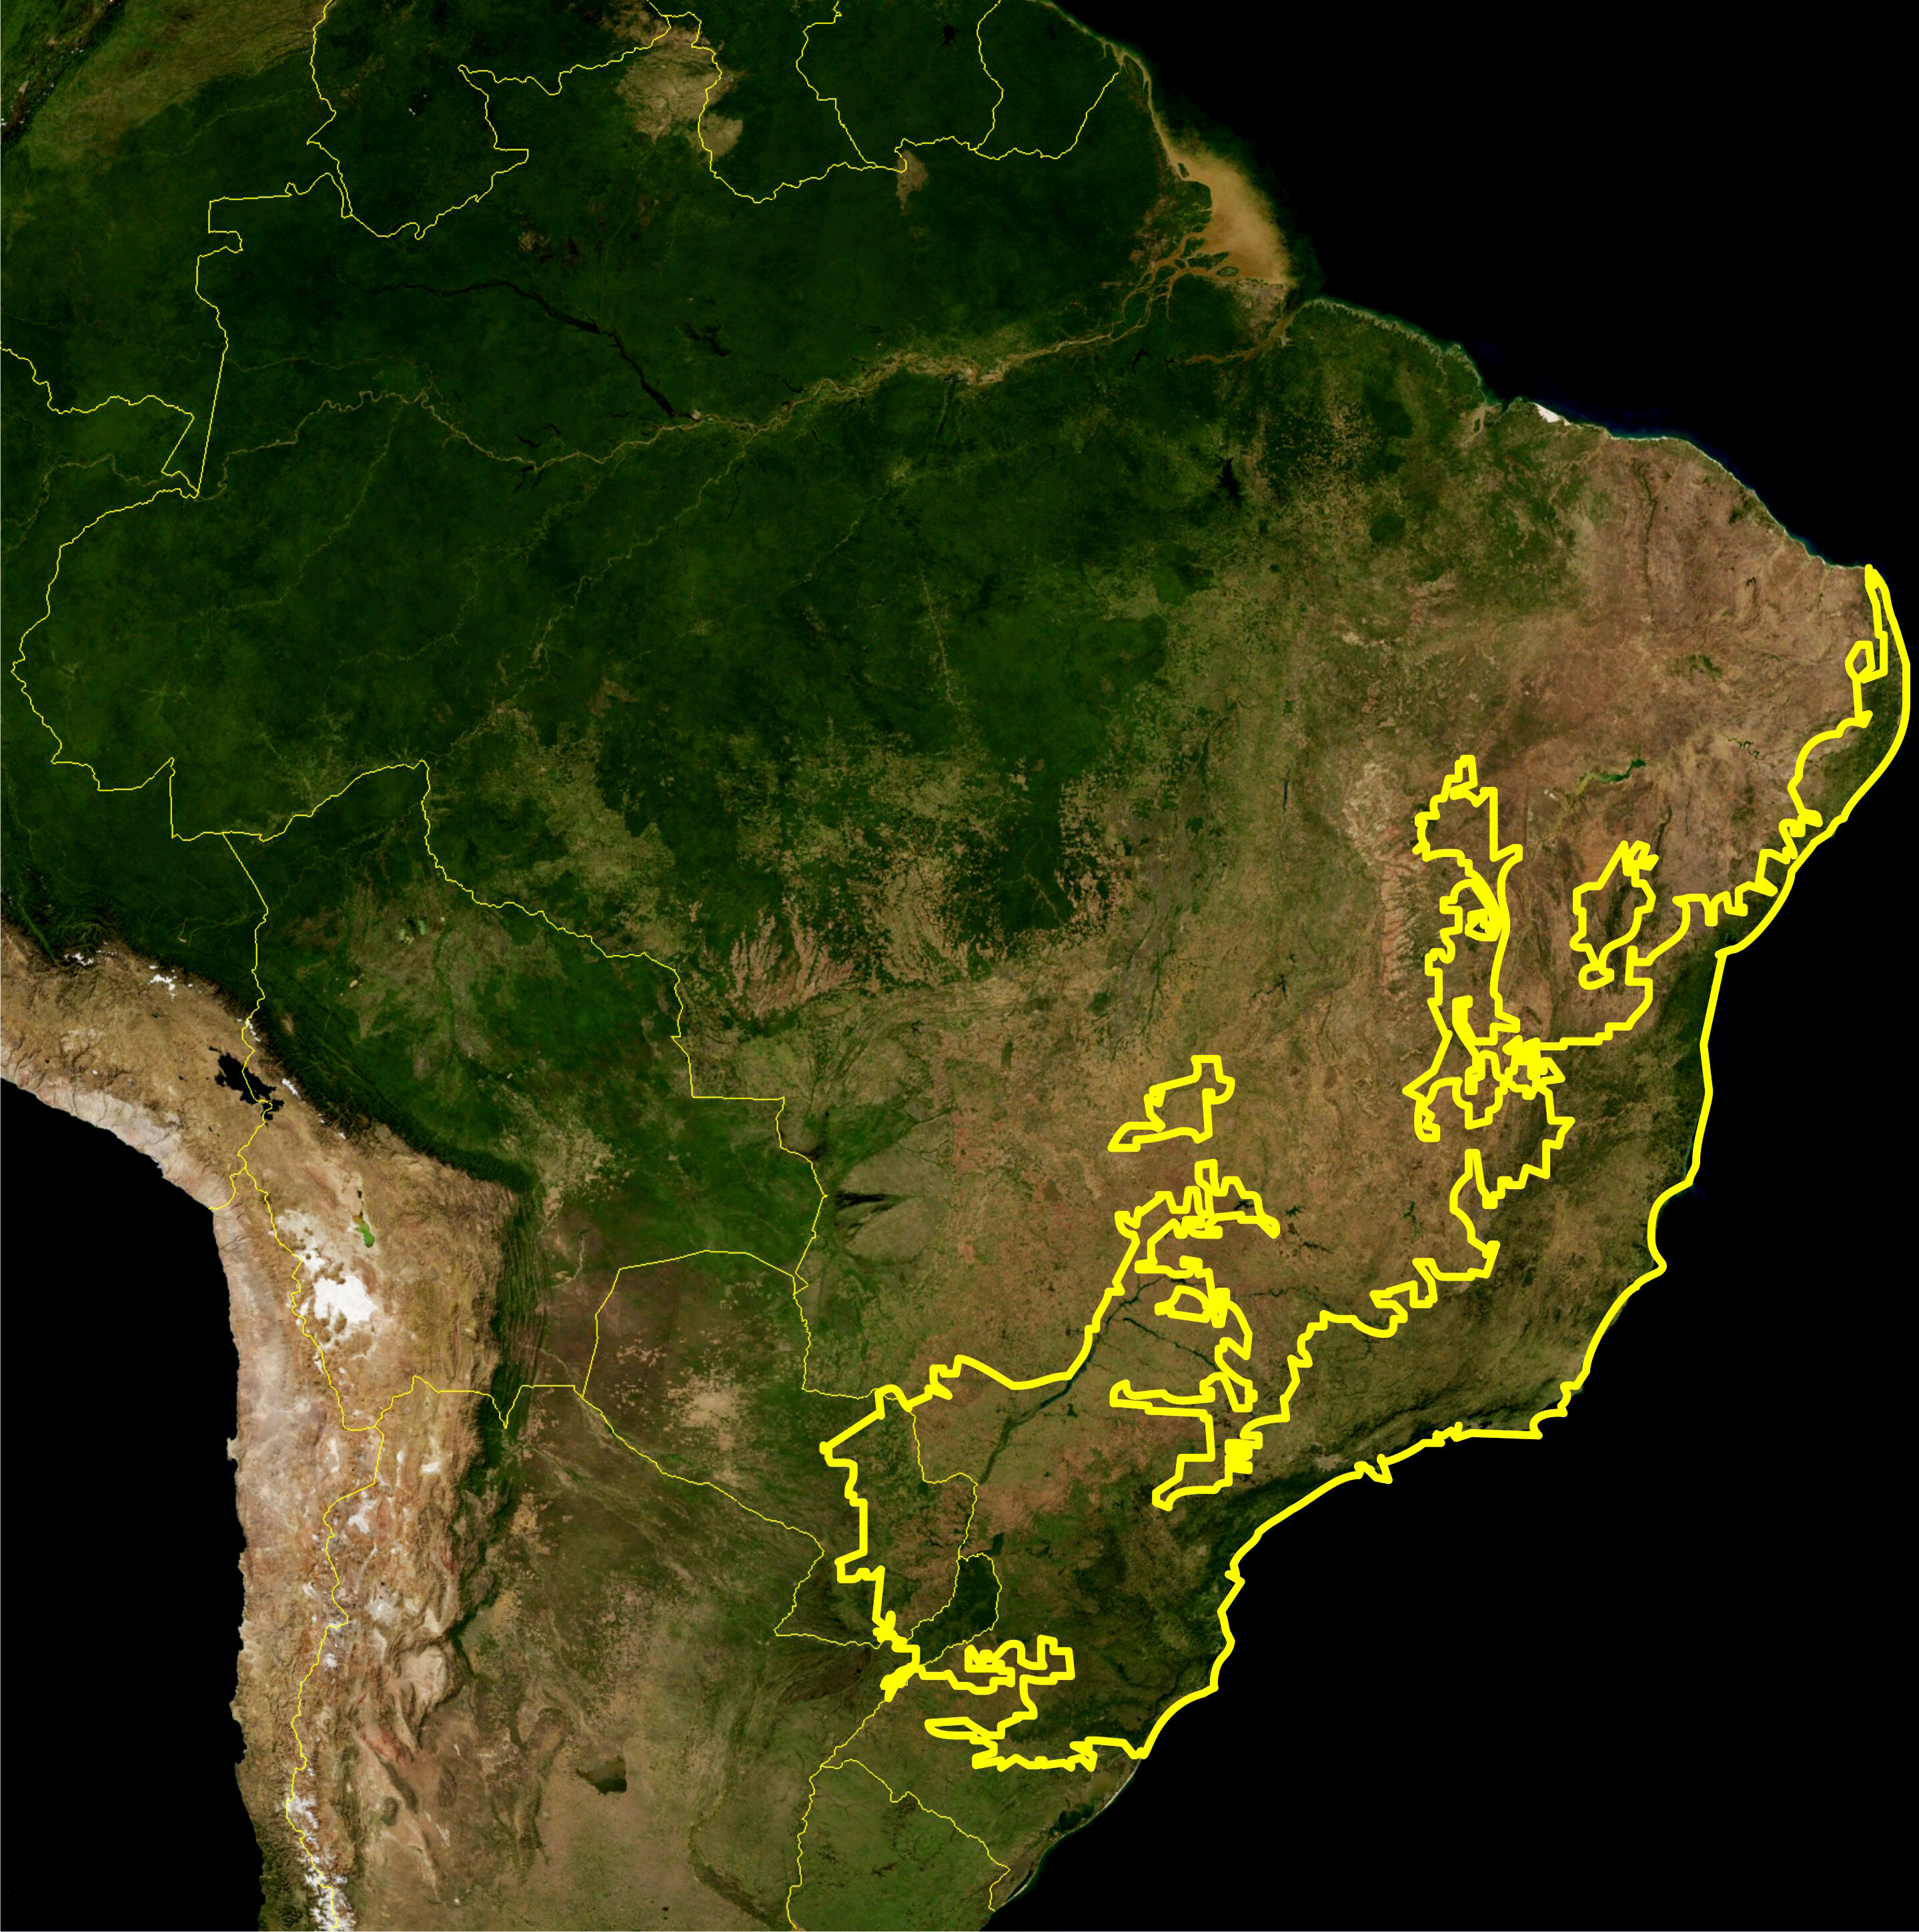 Brazil's Atlantic Forest will radically change in the next 50 years